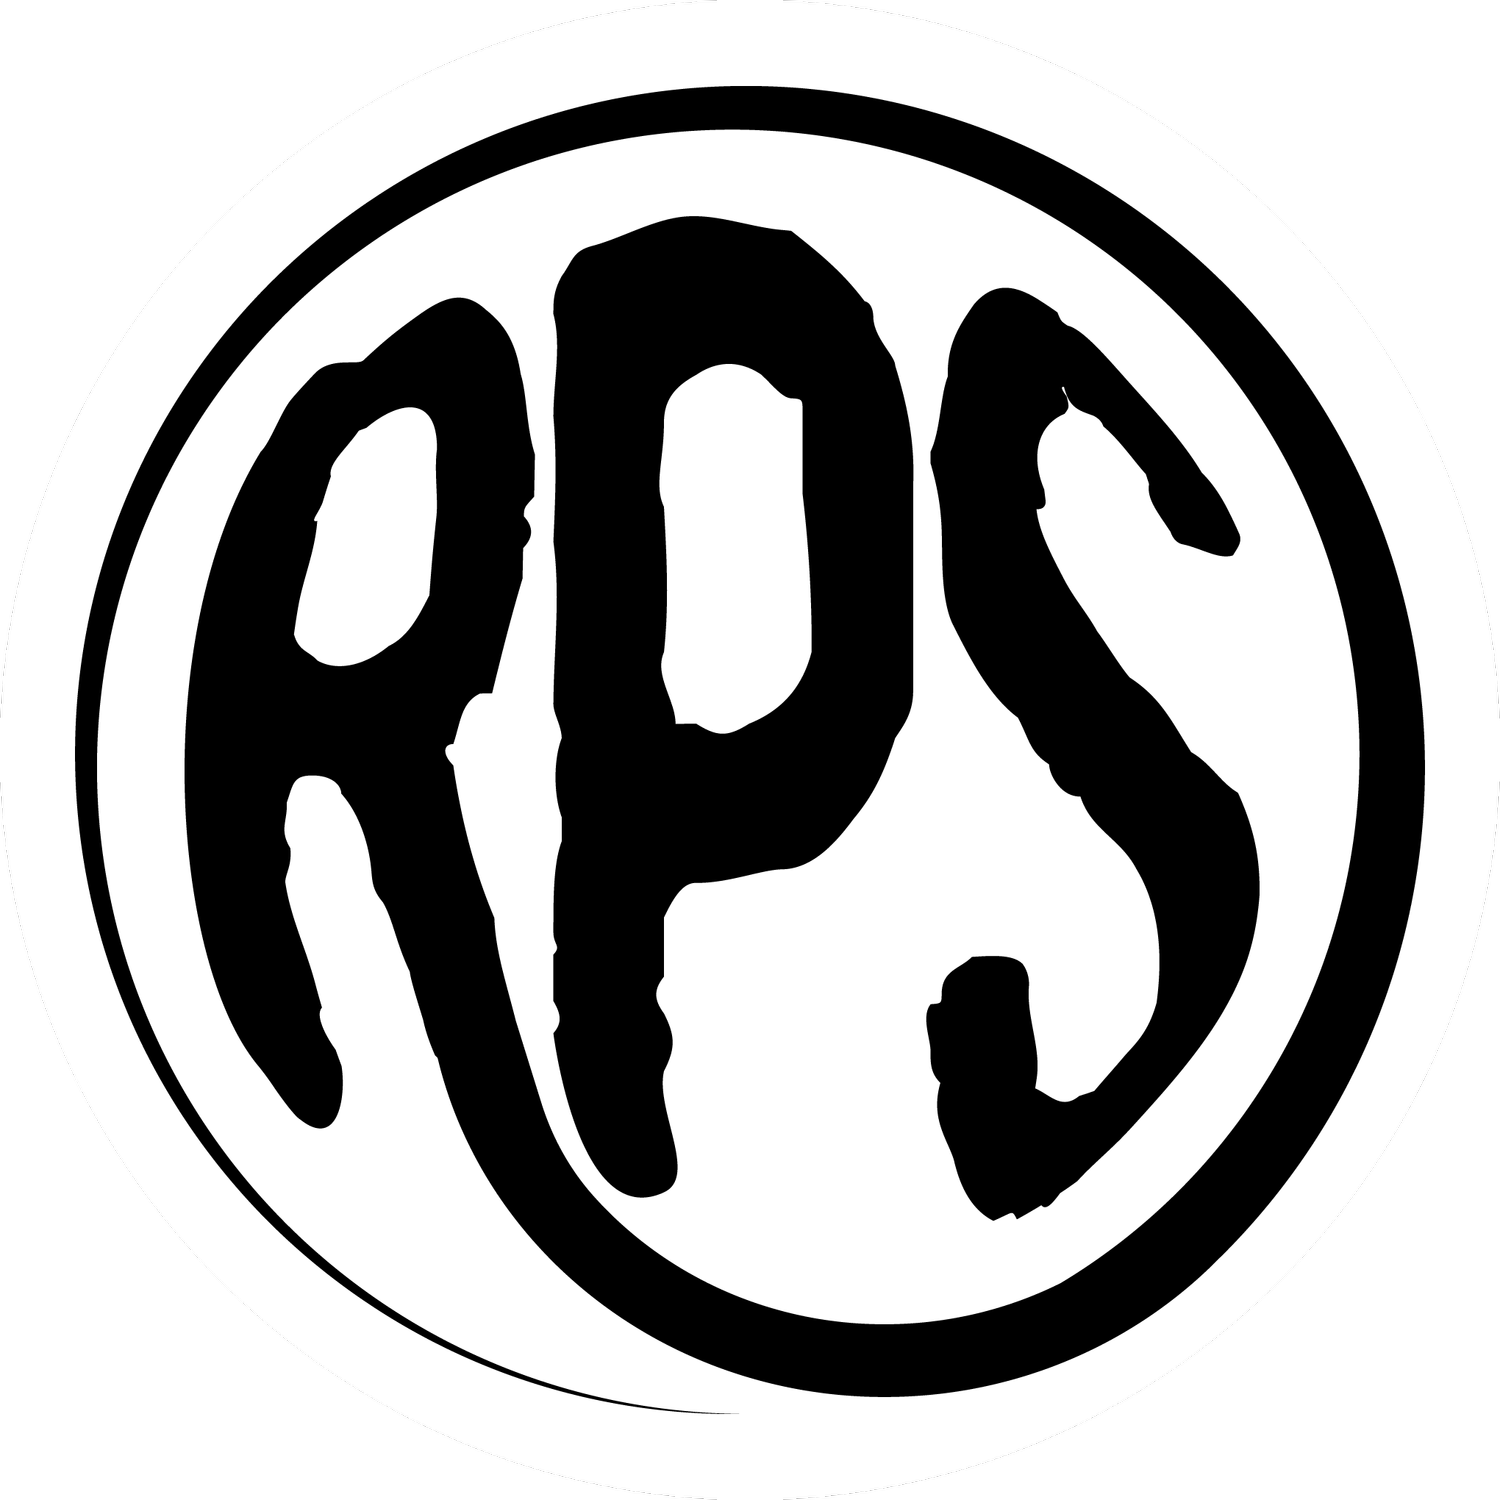 RPS - Do the Simple Things Savagely Well for Uncommon Results